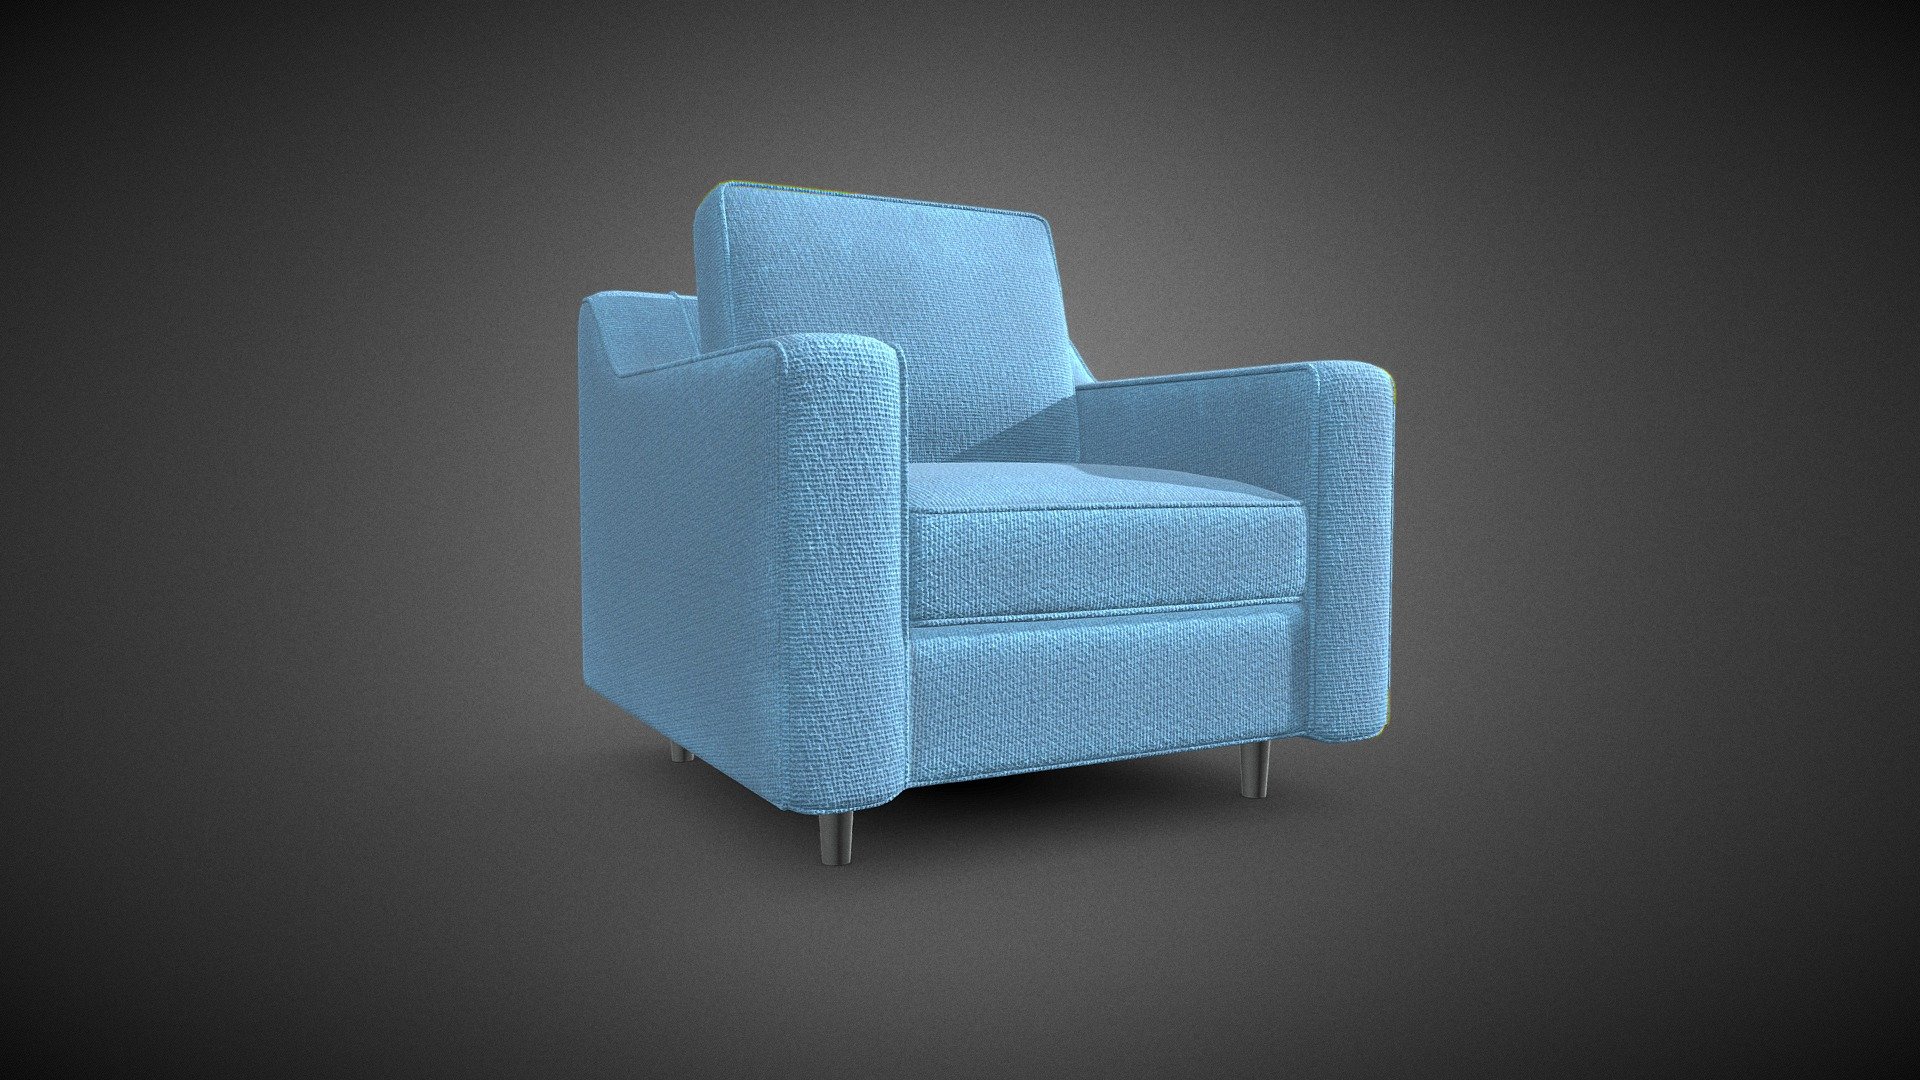 Sofa- 3d model ready for VirtualReality(VR),Augmented Reality(AR),games and other render engines.This lowpoly 3d model of Sofa is equipped with 4k resolution textures.The PBR_Maps includes- Diffuse,roughness,metallic,normal 3d model